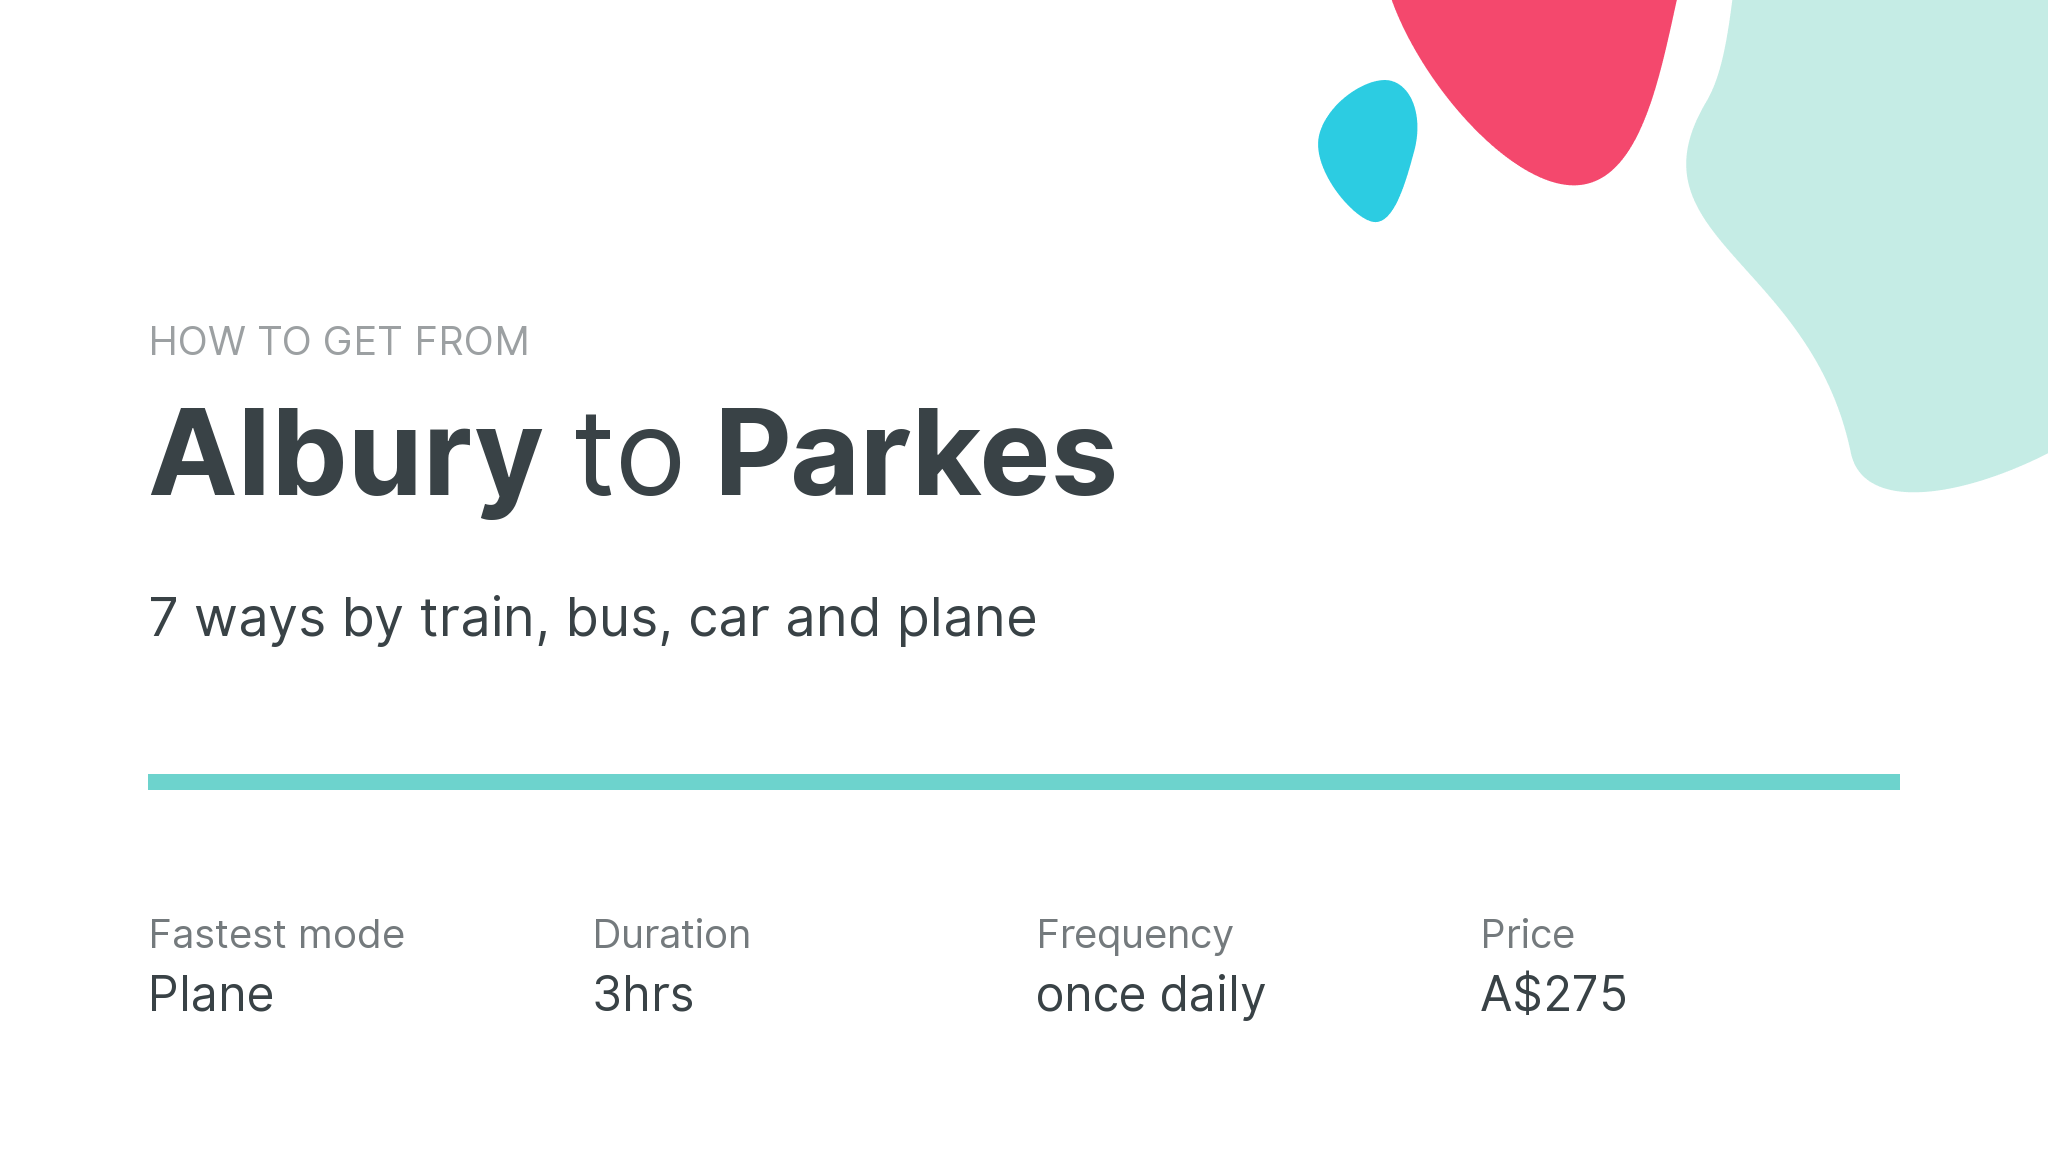 How do I get from Albury to Parkes